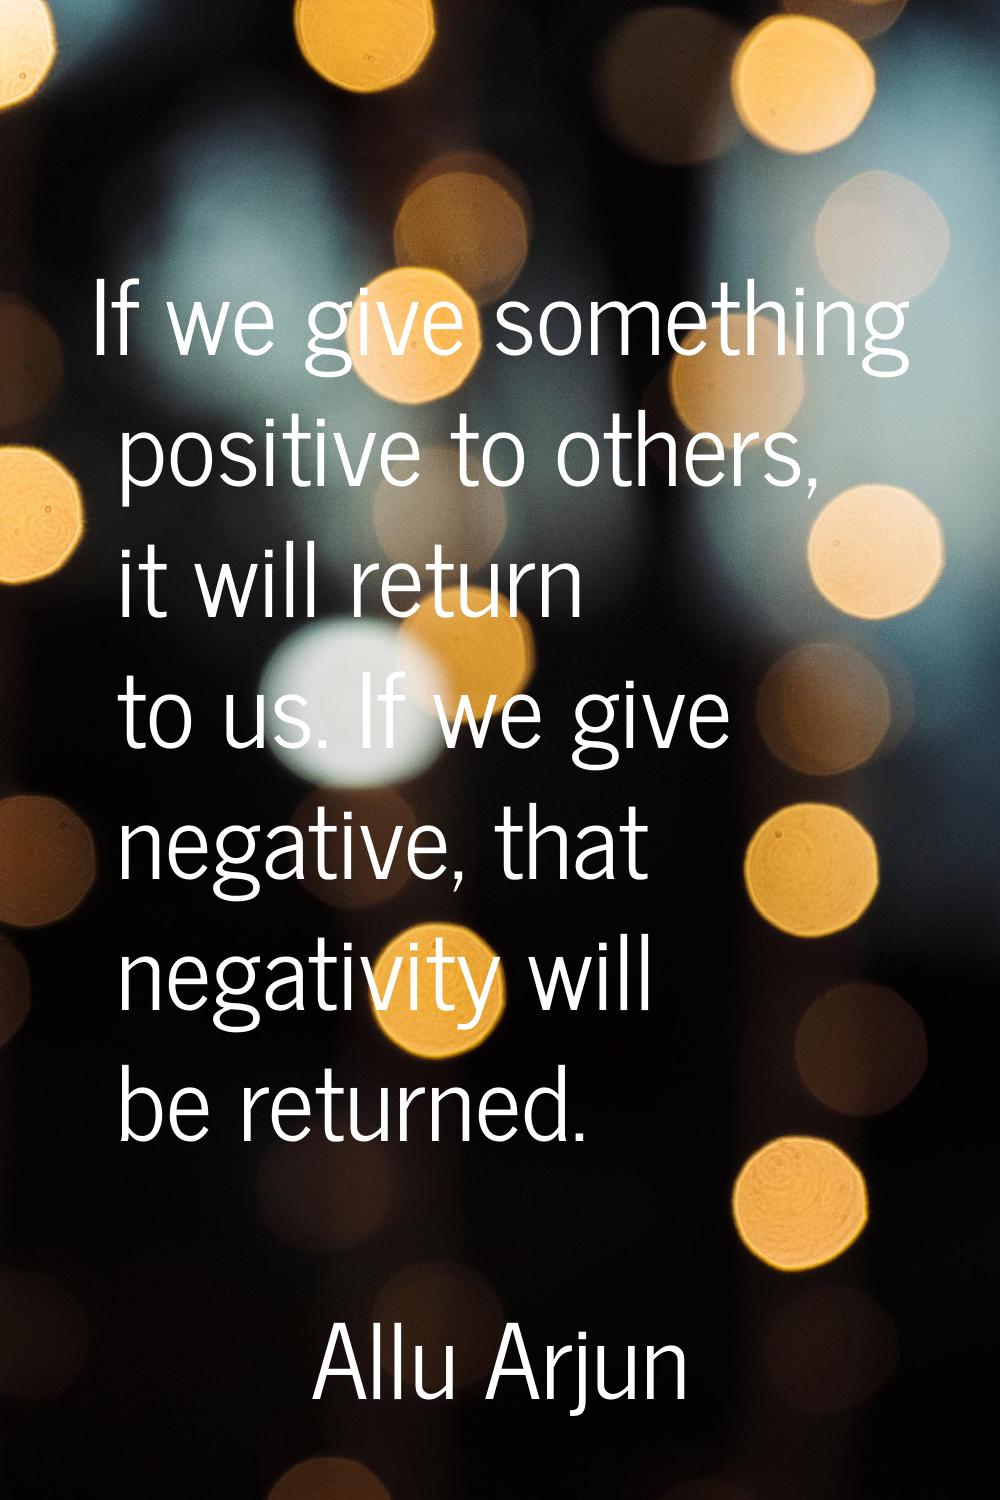 If we give something positive to others, it will return to us. If we give negative, that negativity